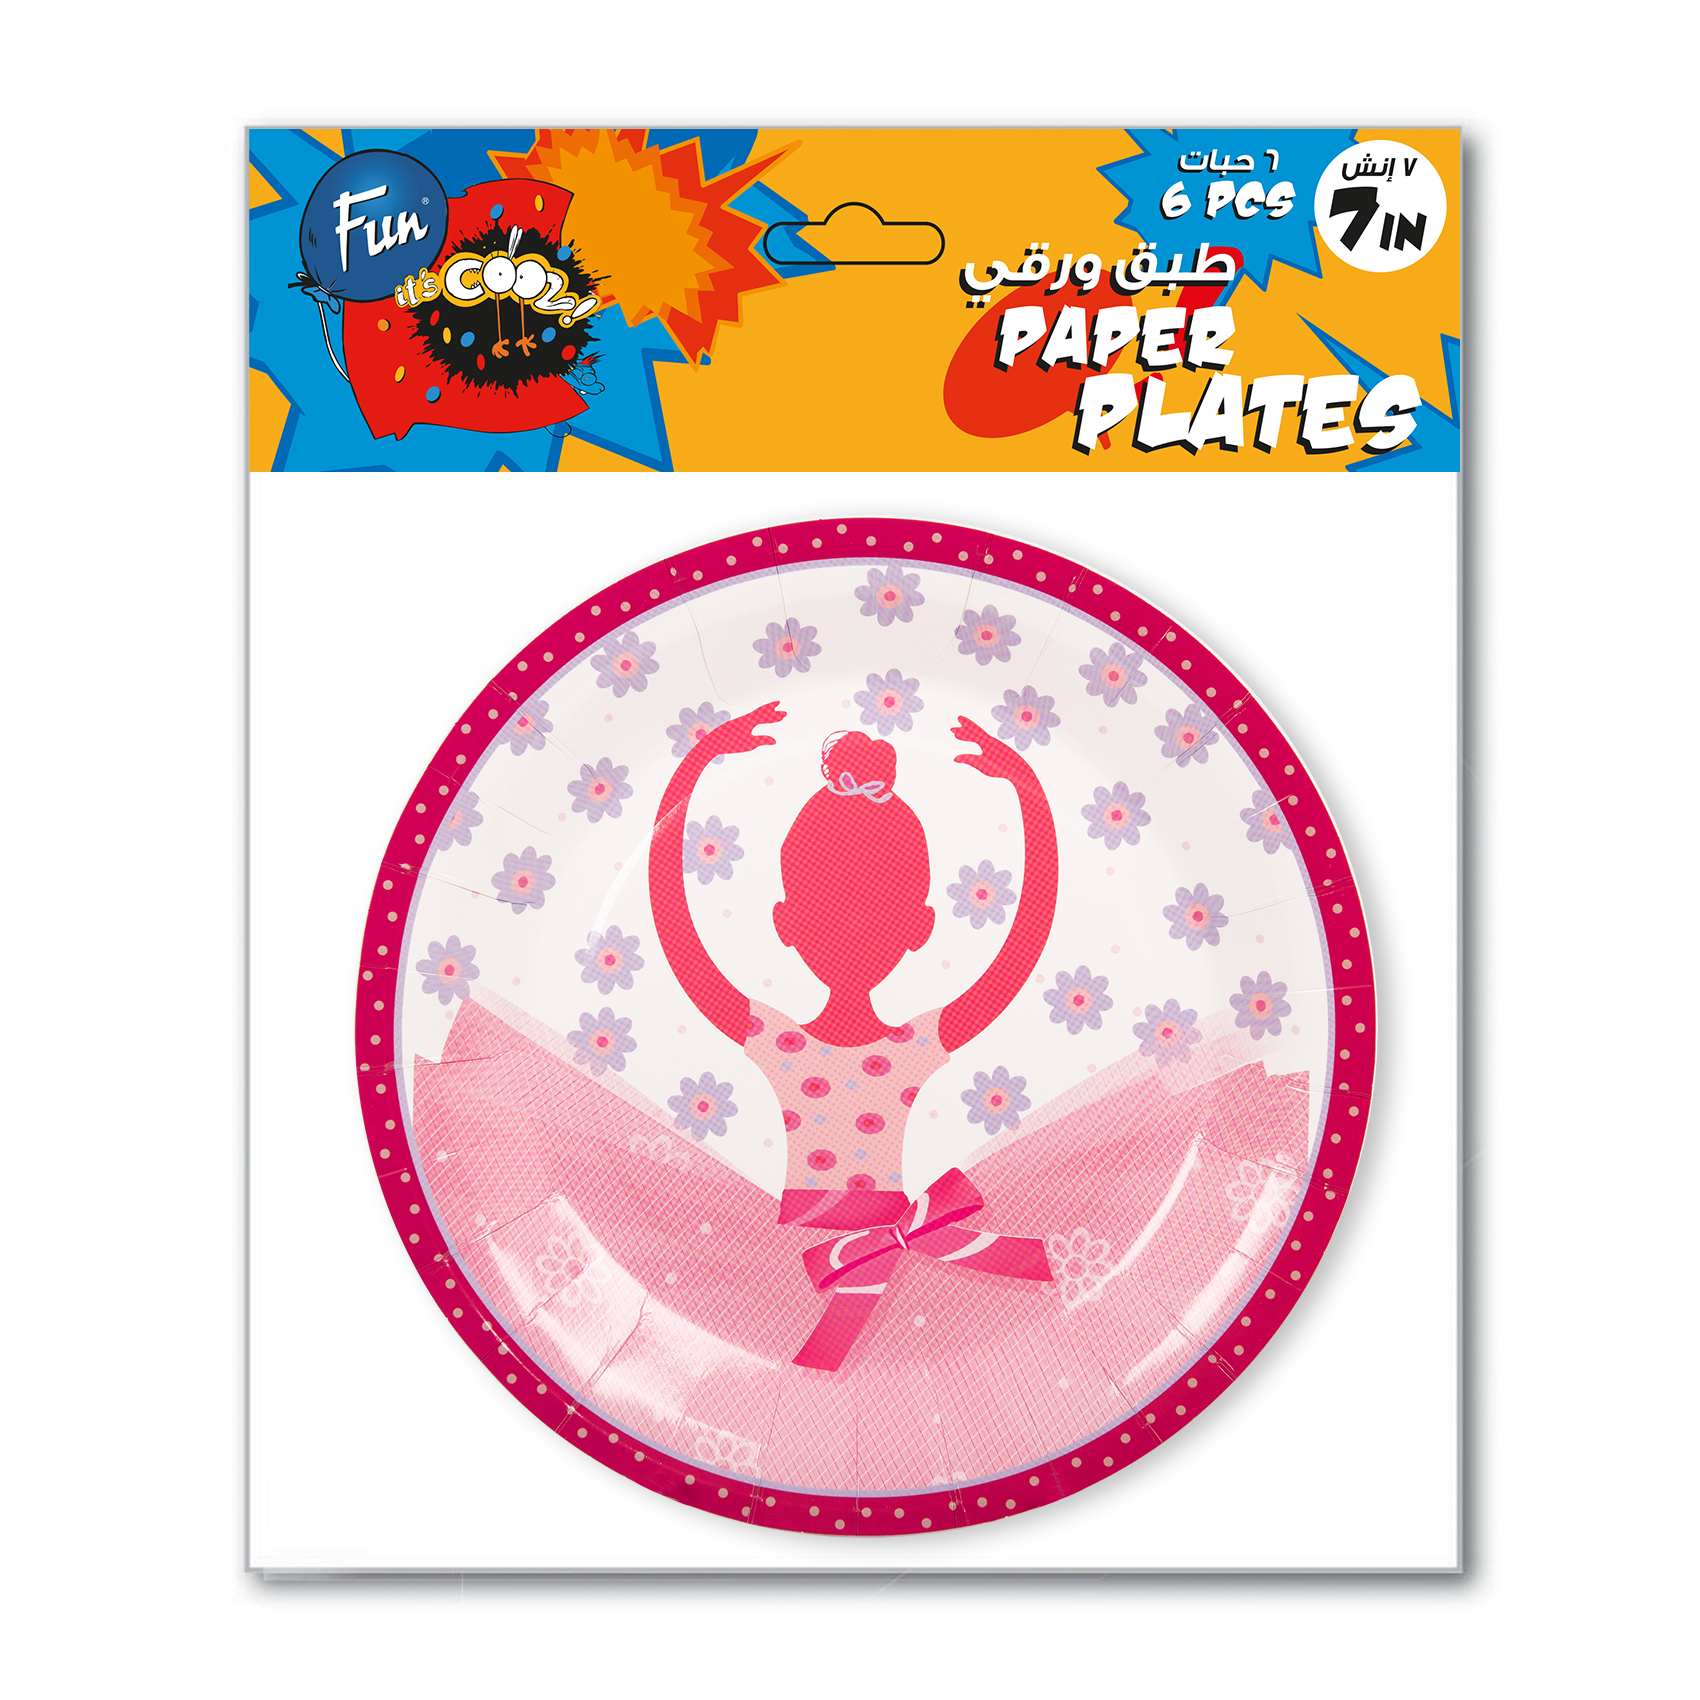 Fun It&#39;s Cool Ballerina Themed Paper Plates Pink And White 7inch 6 PCS